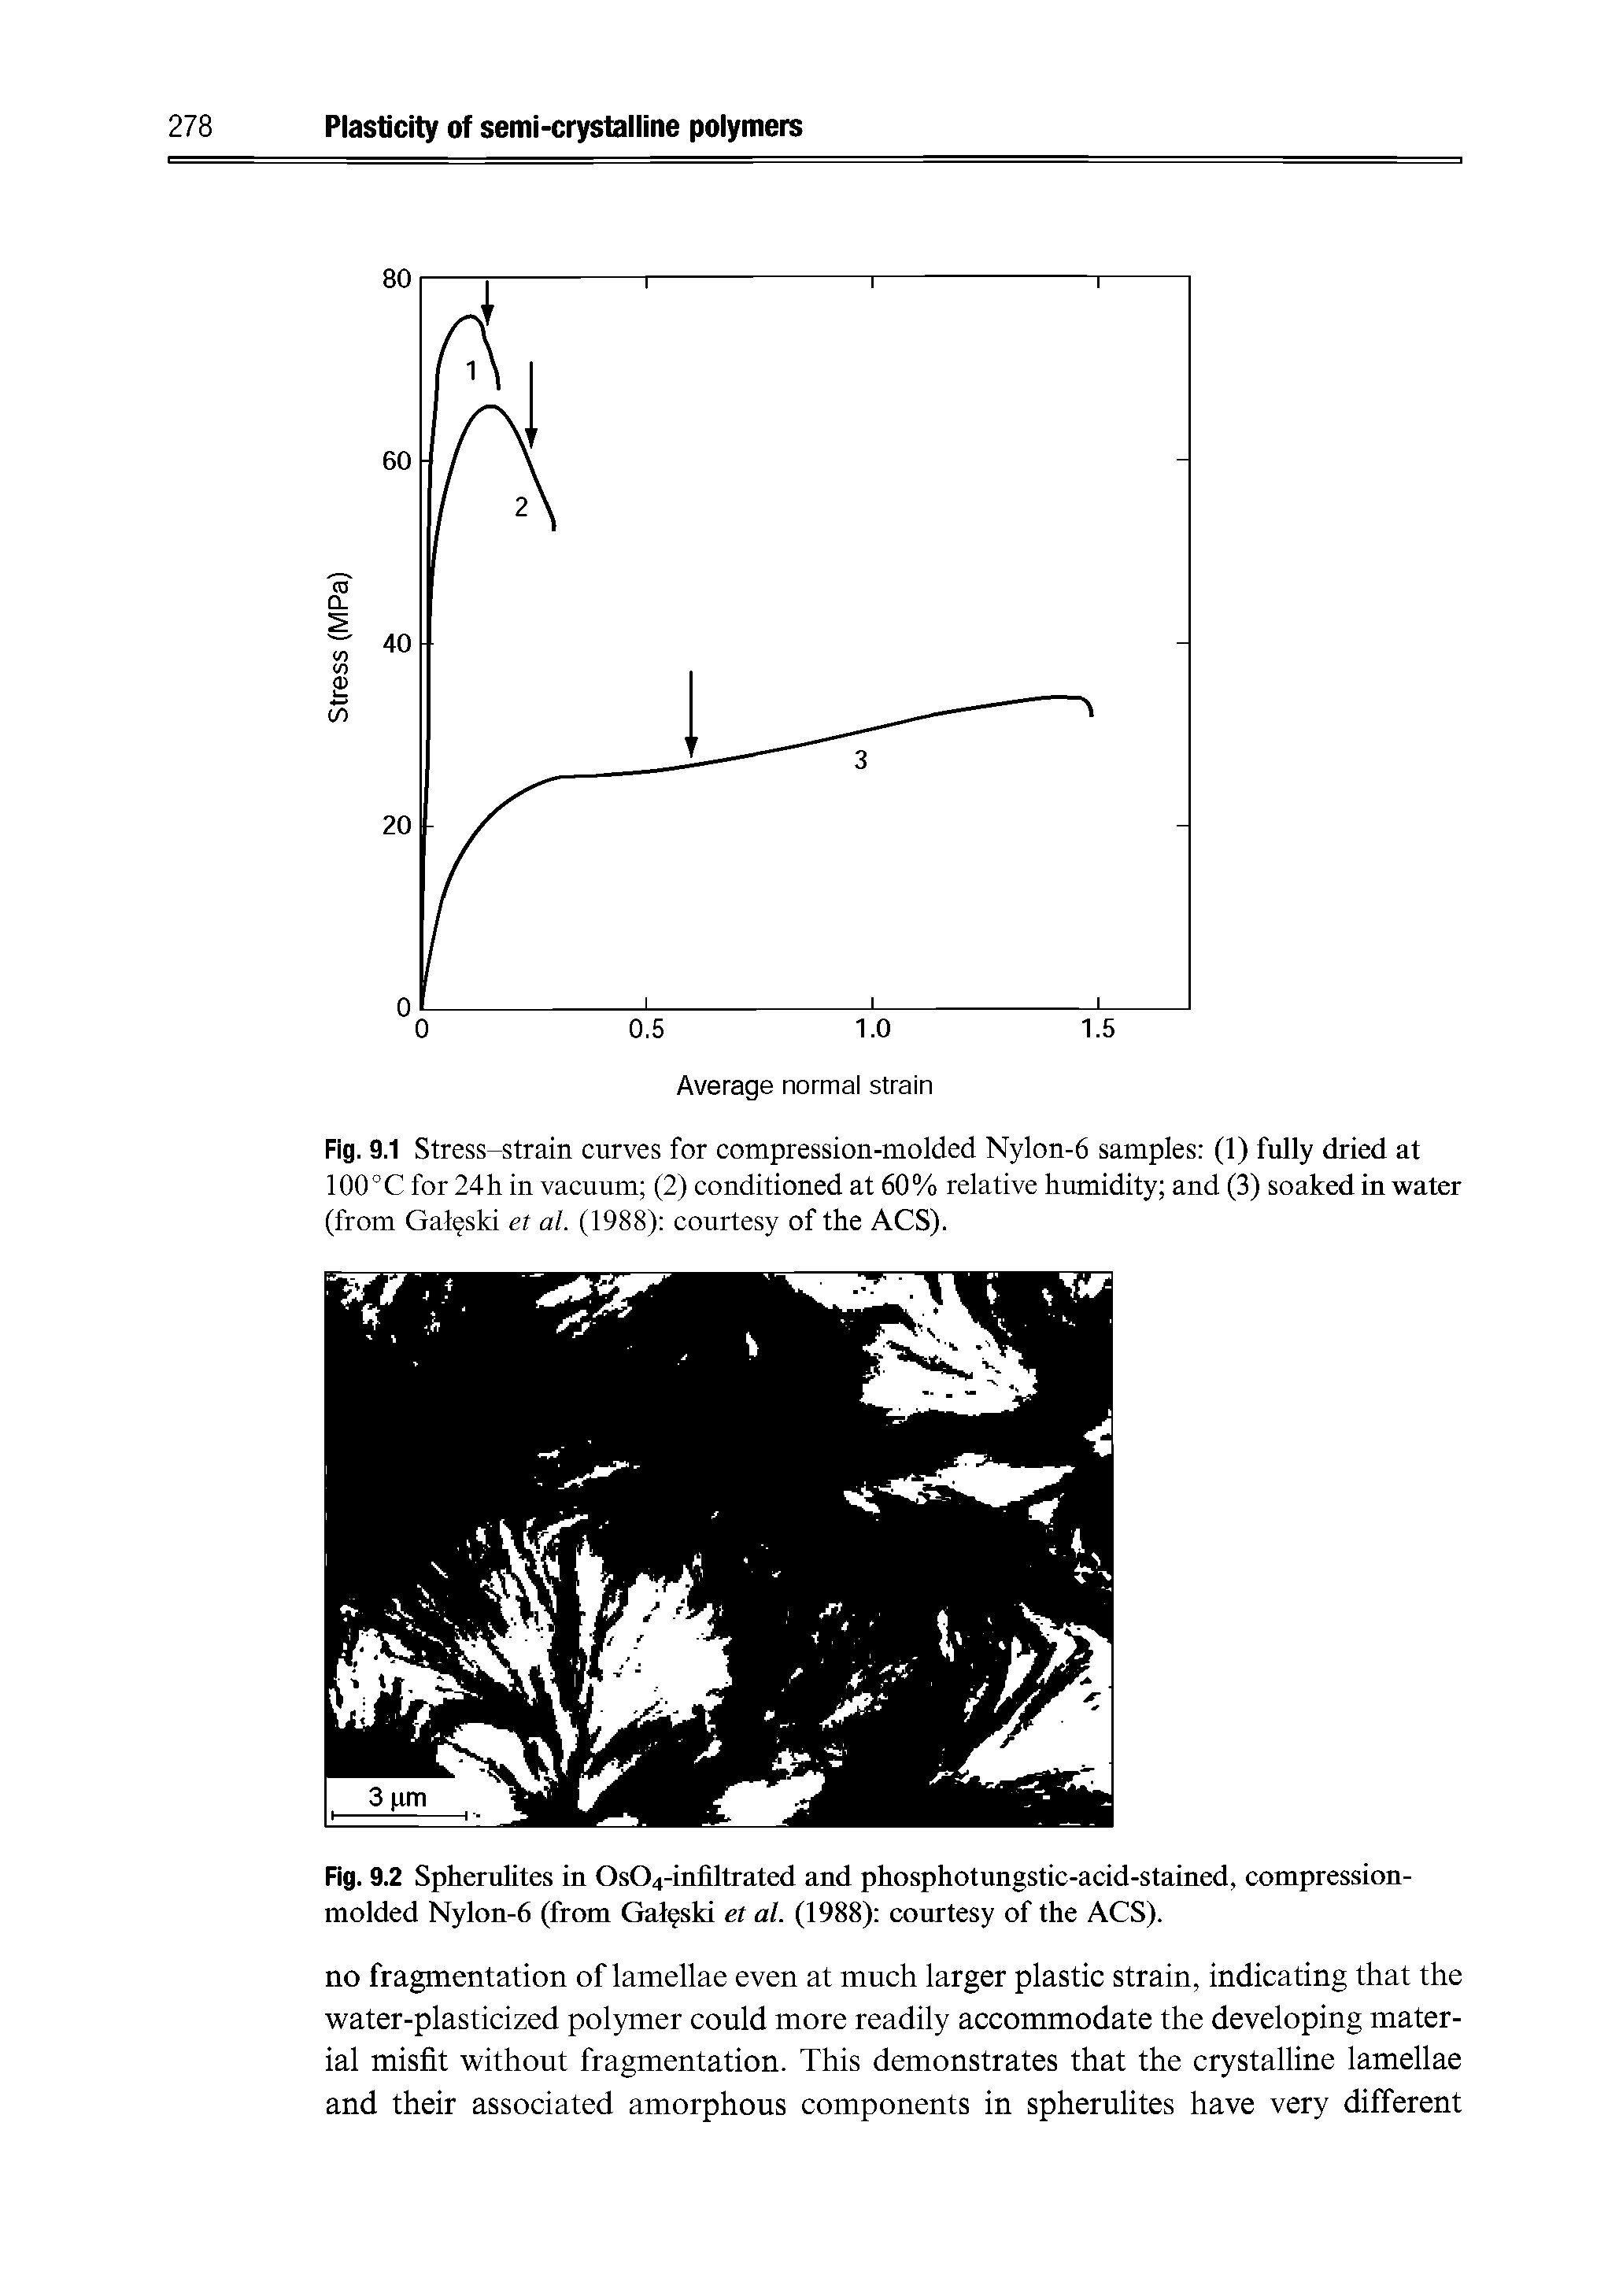 Fig. 9.1 Stress-strain curves for compression-molded Nylon-6 samples (1) fully dried at 100°C for 24 h in vacuum (2) conditioned at 60% relative humidity and (3) soaked in water (from Gal ski et al. (1988) courtesy of the ACS).